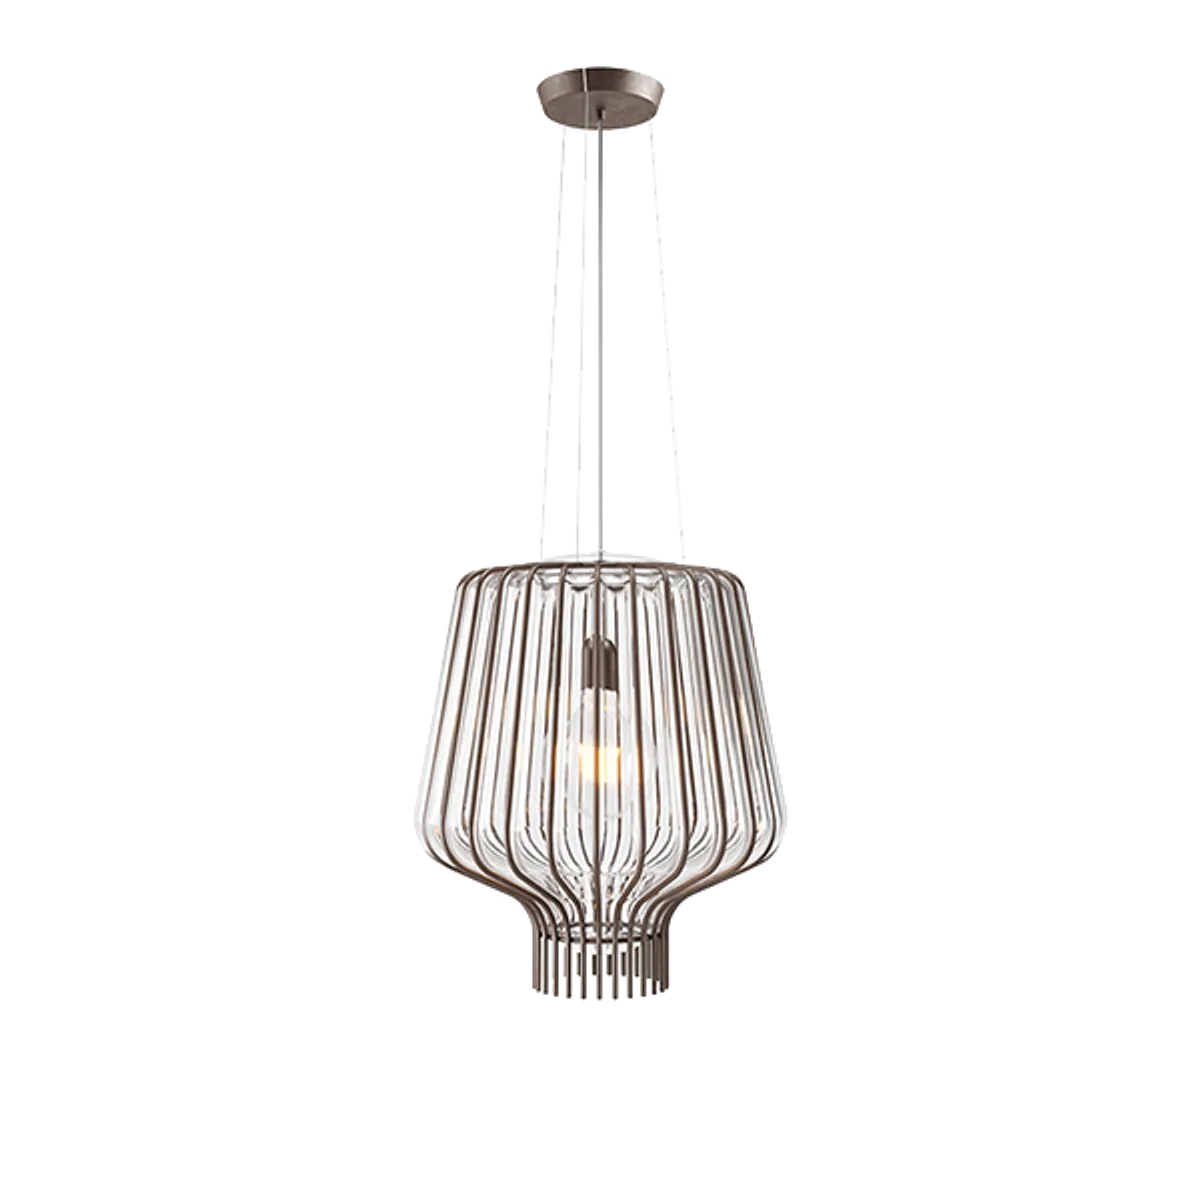 Saya Pendant Lamp 40Cm Uk Supplier Inside Out Contracts